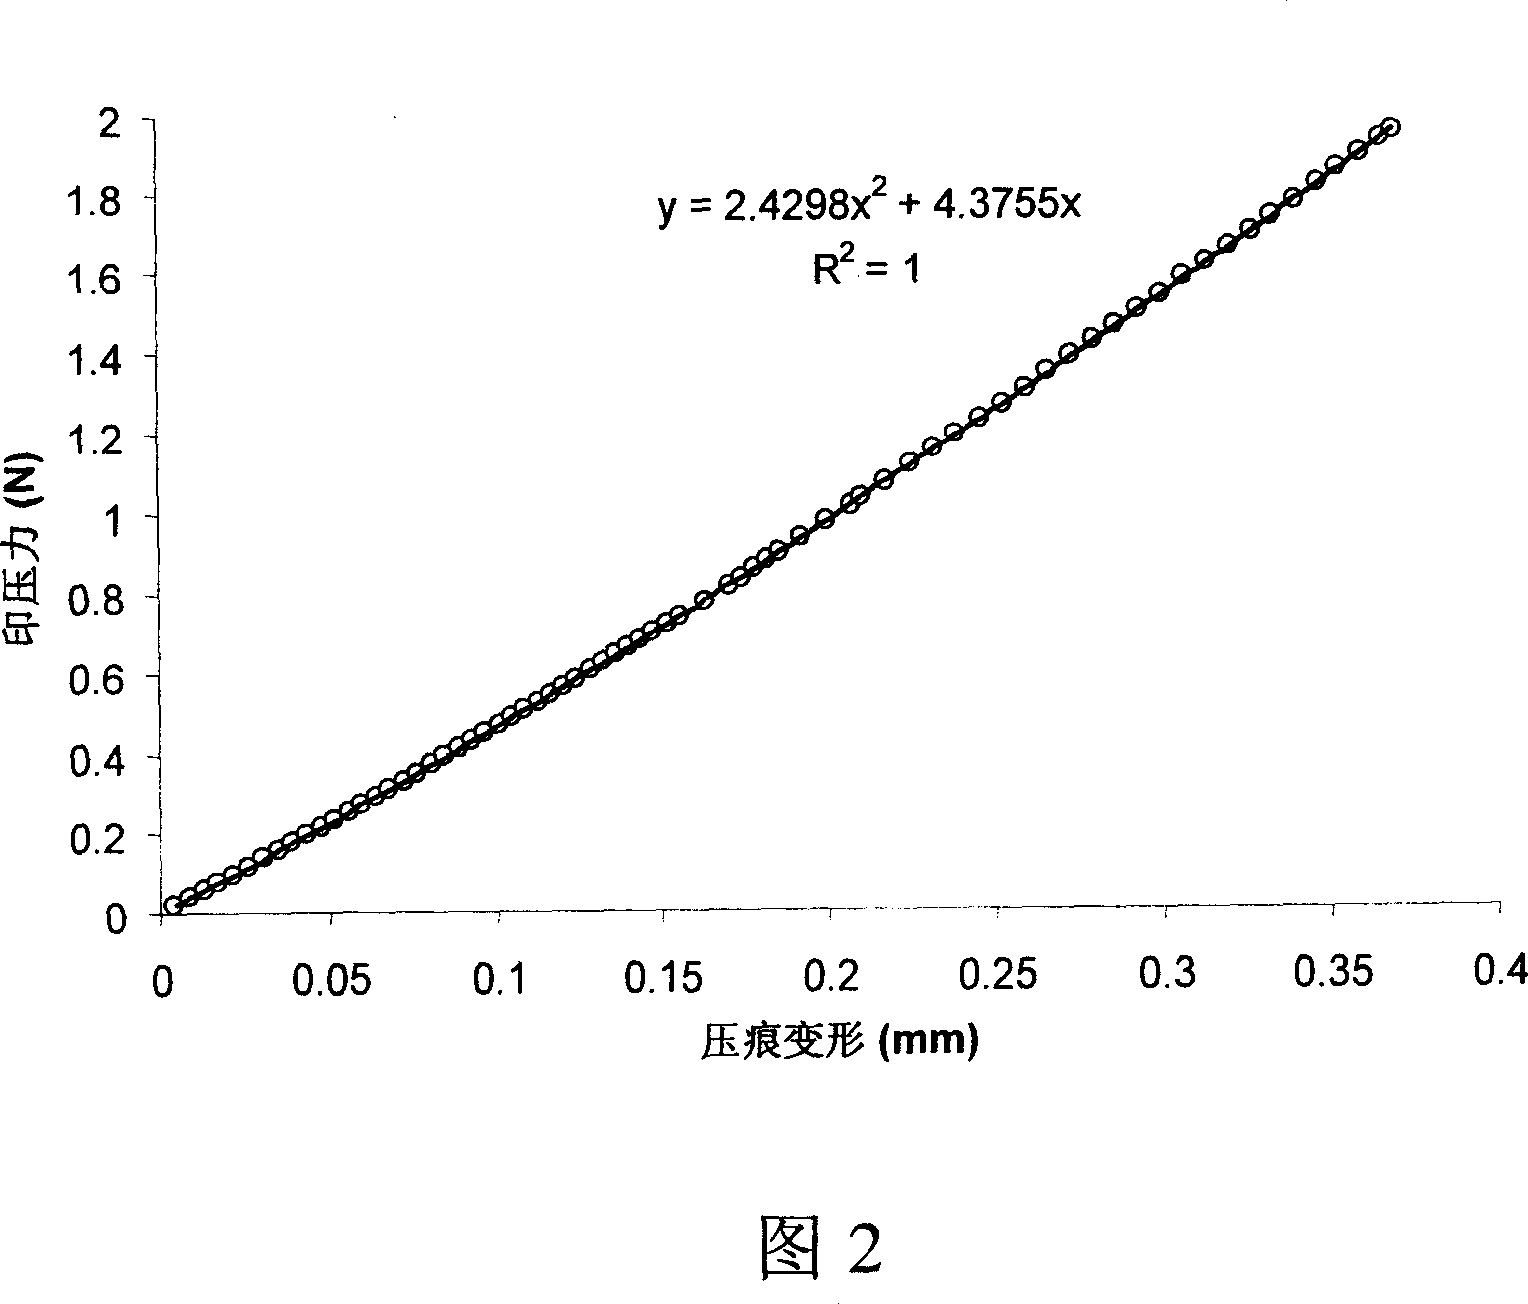 Method for testing and determining material or organizational Yang modulus and poisson ratio by impression